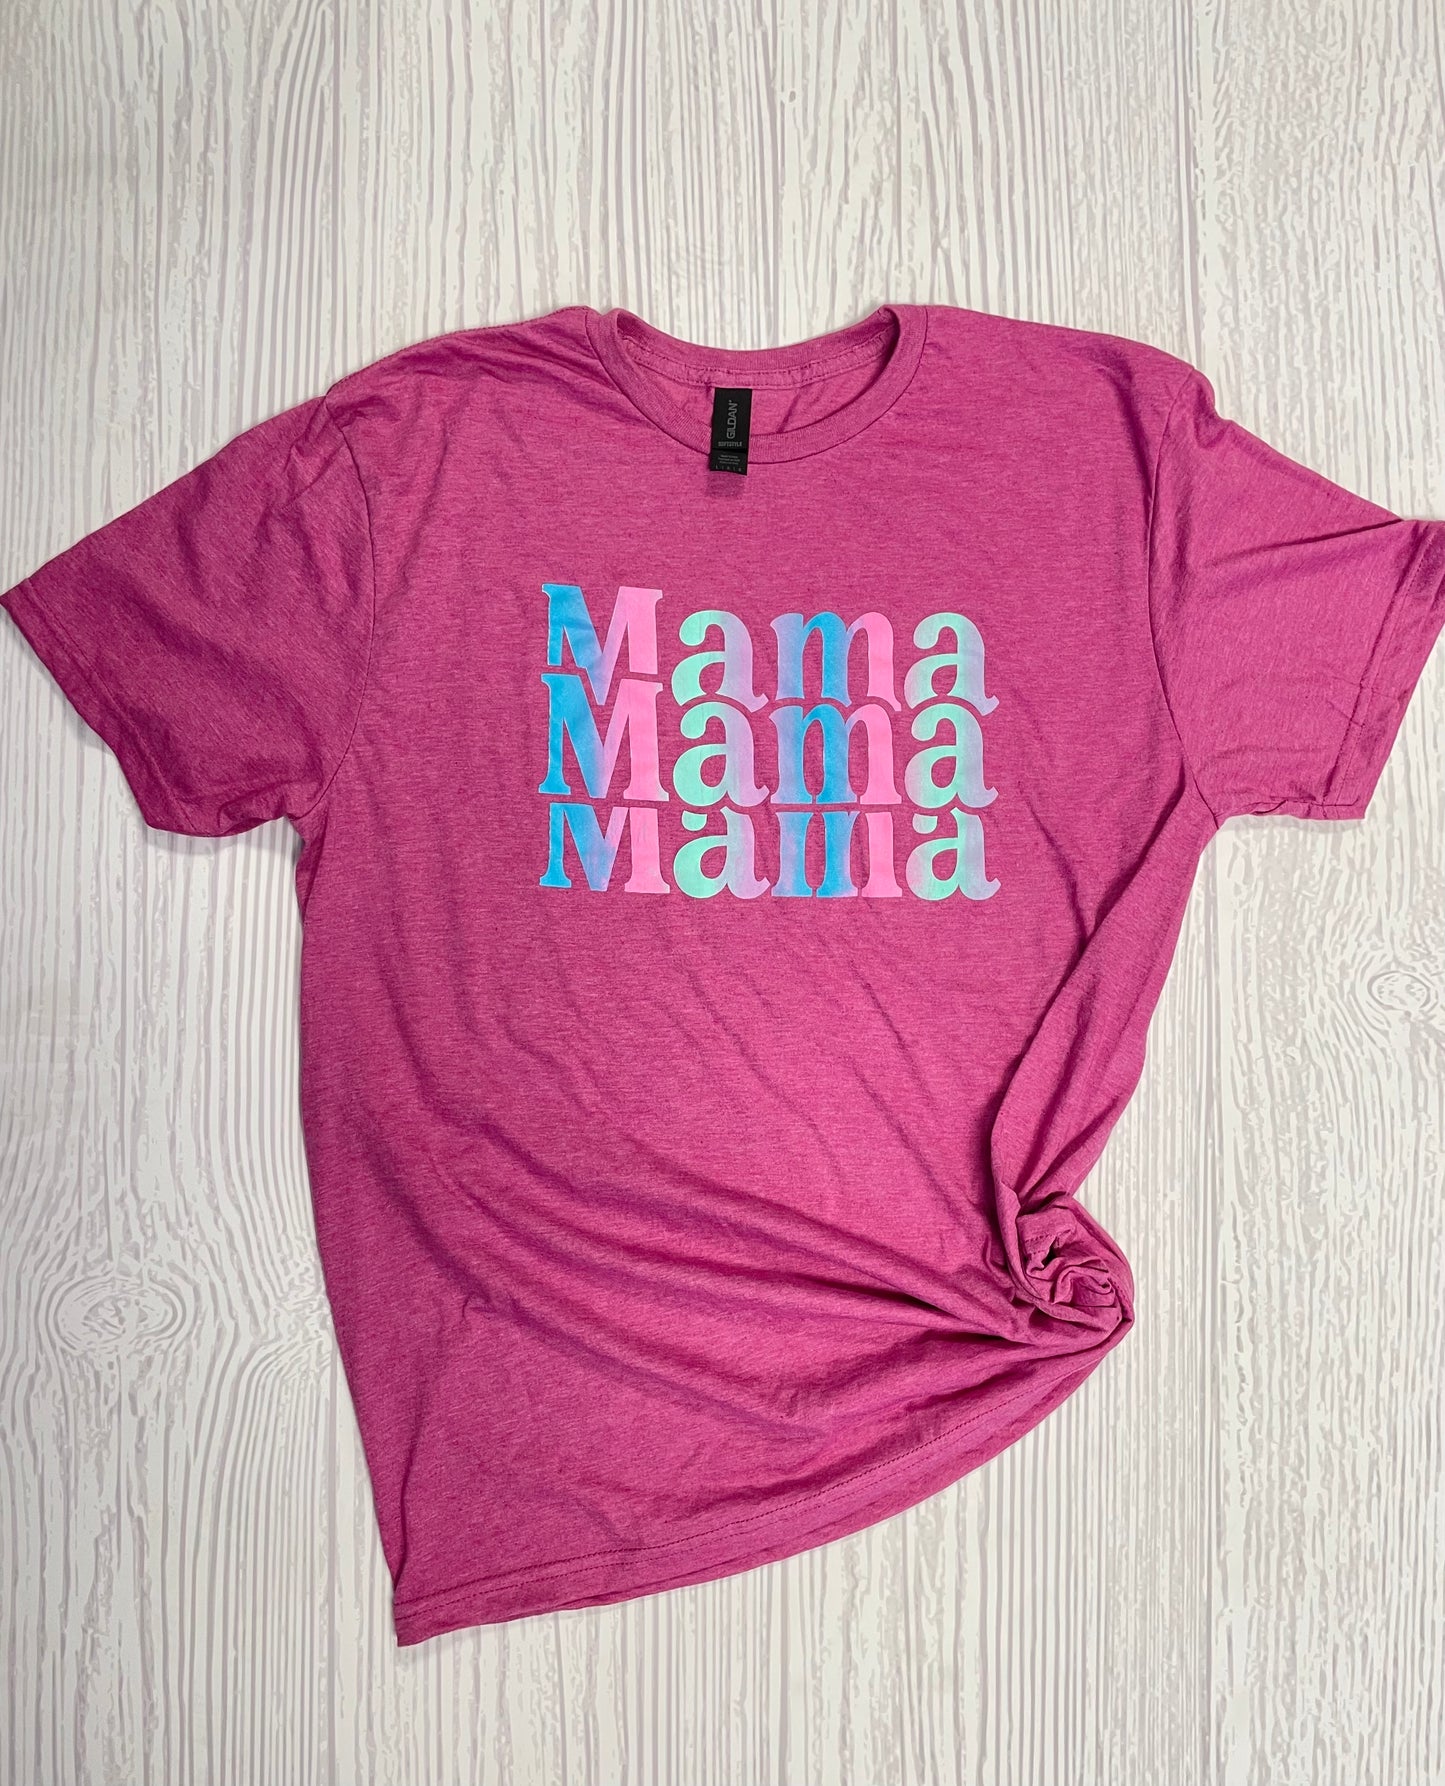 Completed Mama Shirts